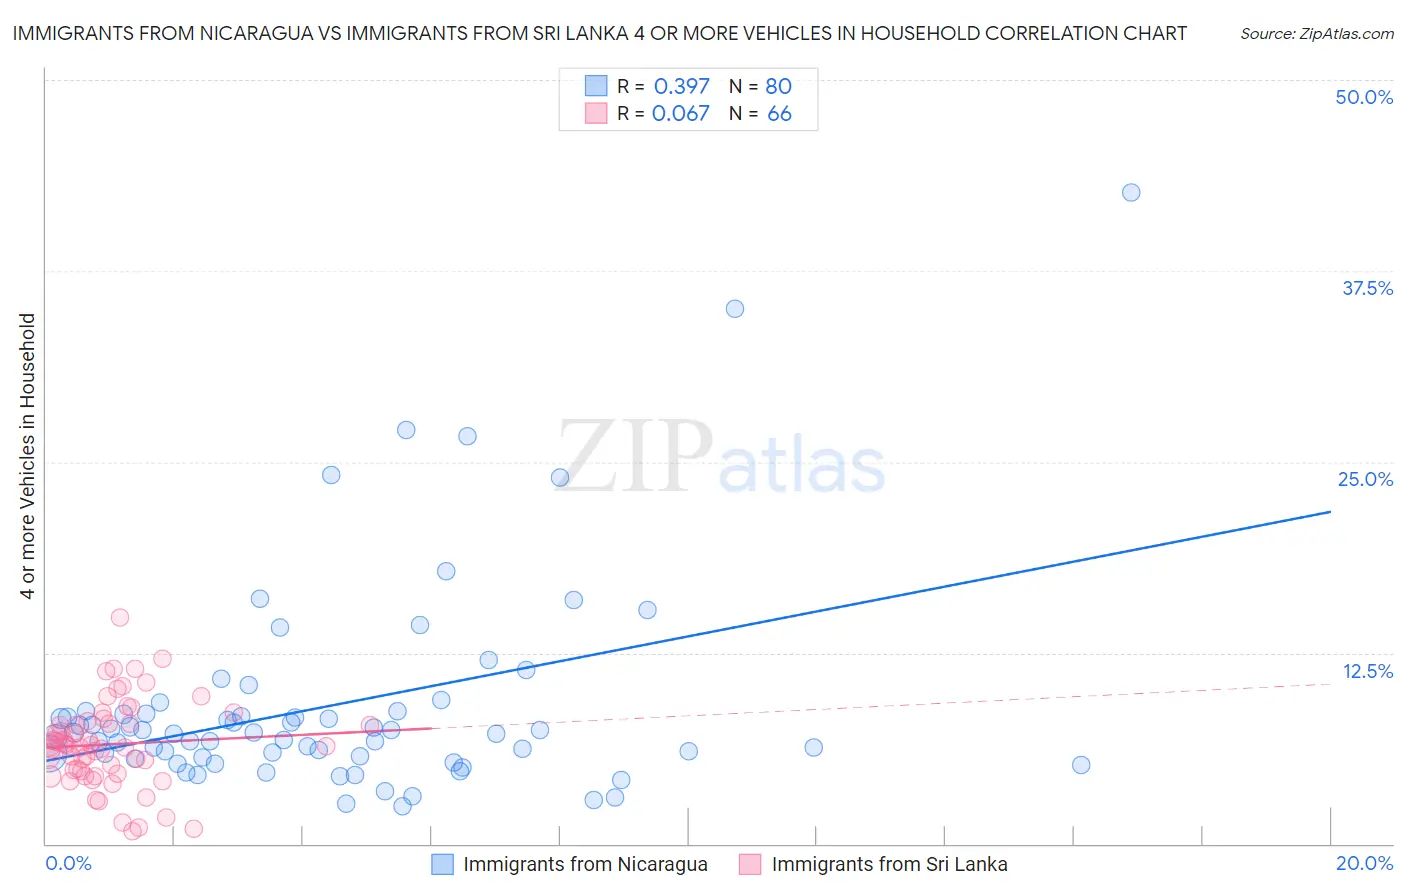 Immigrants from Nicaragua vs Immigrants from Sri Lanka 4 or more Vehicles in Household